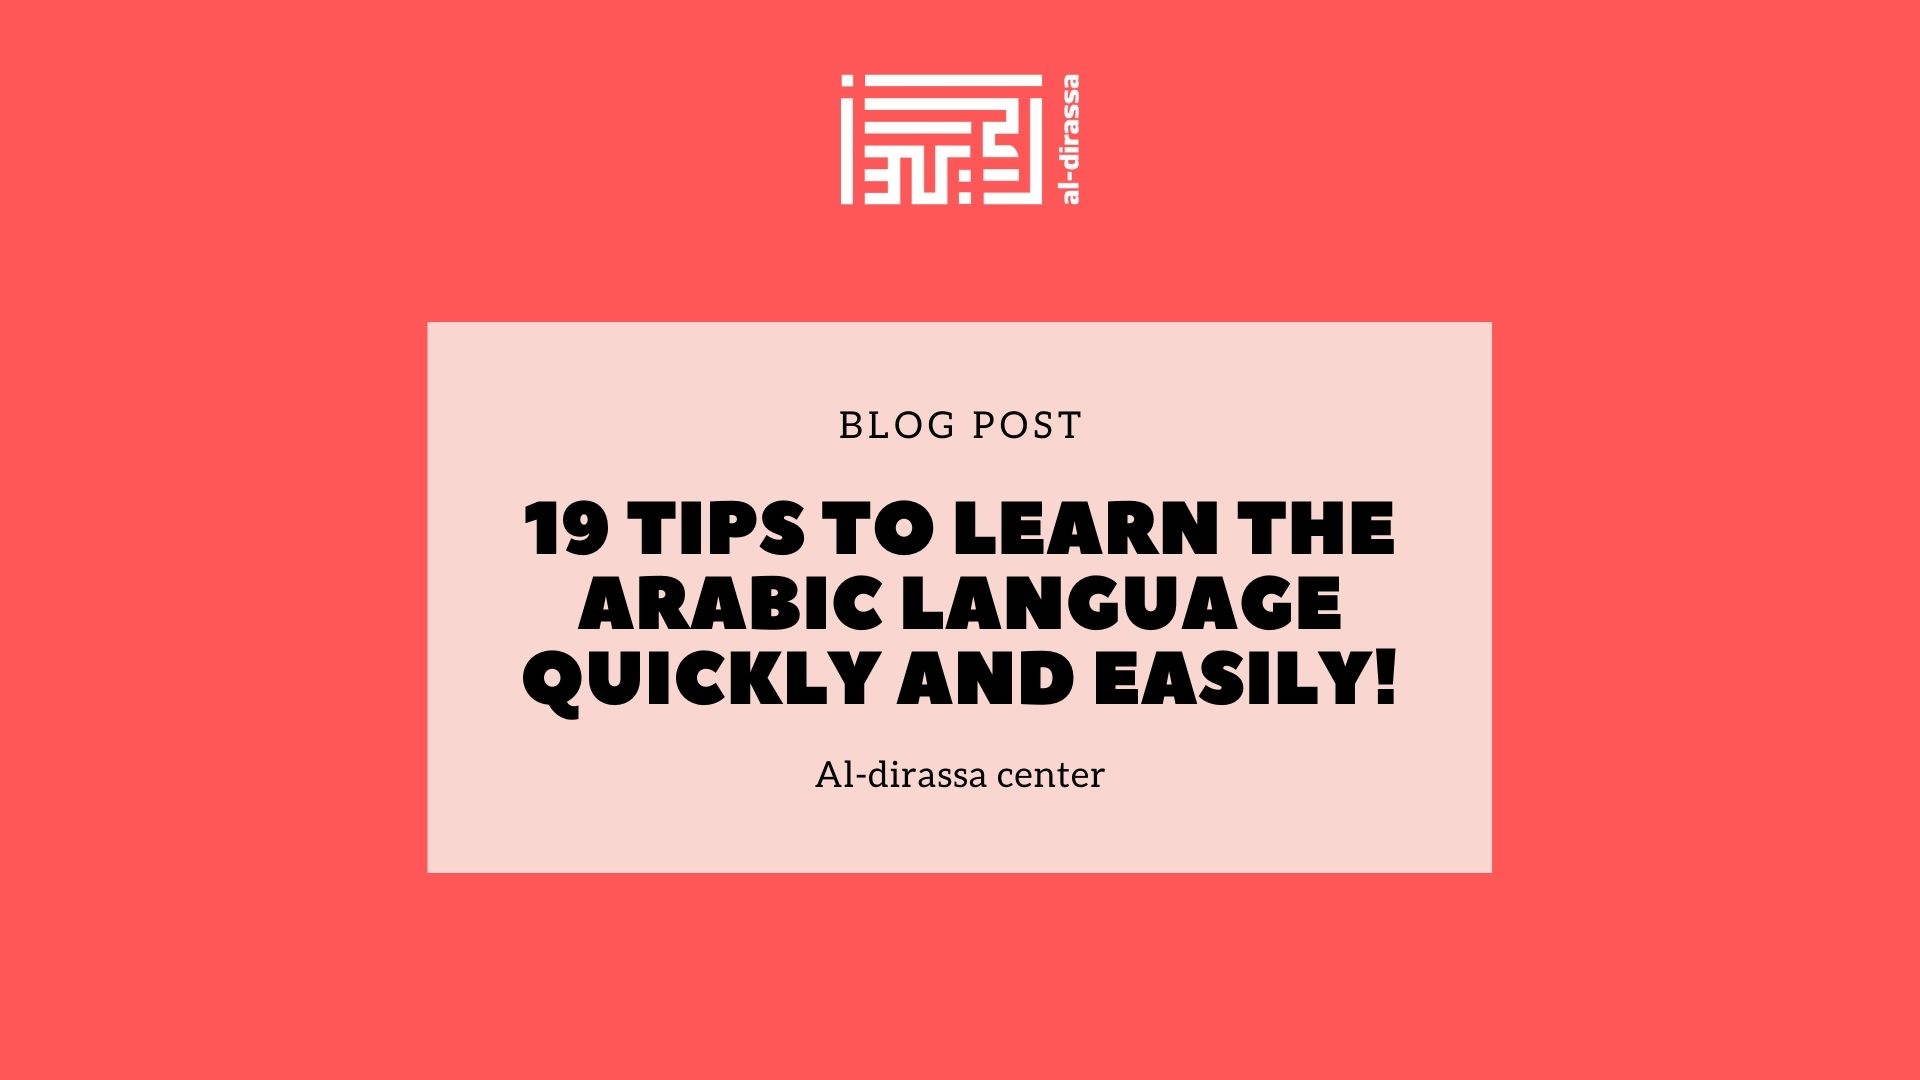 19 tips to learn the Arabic language quickly and easily!